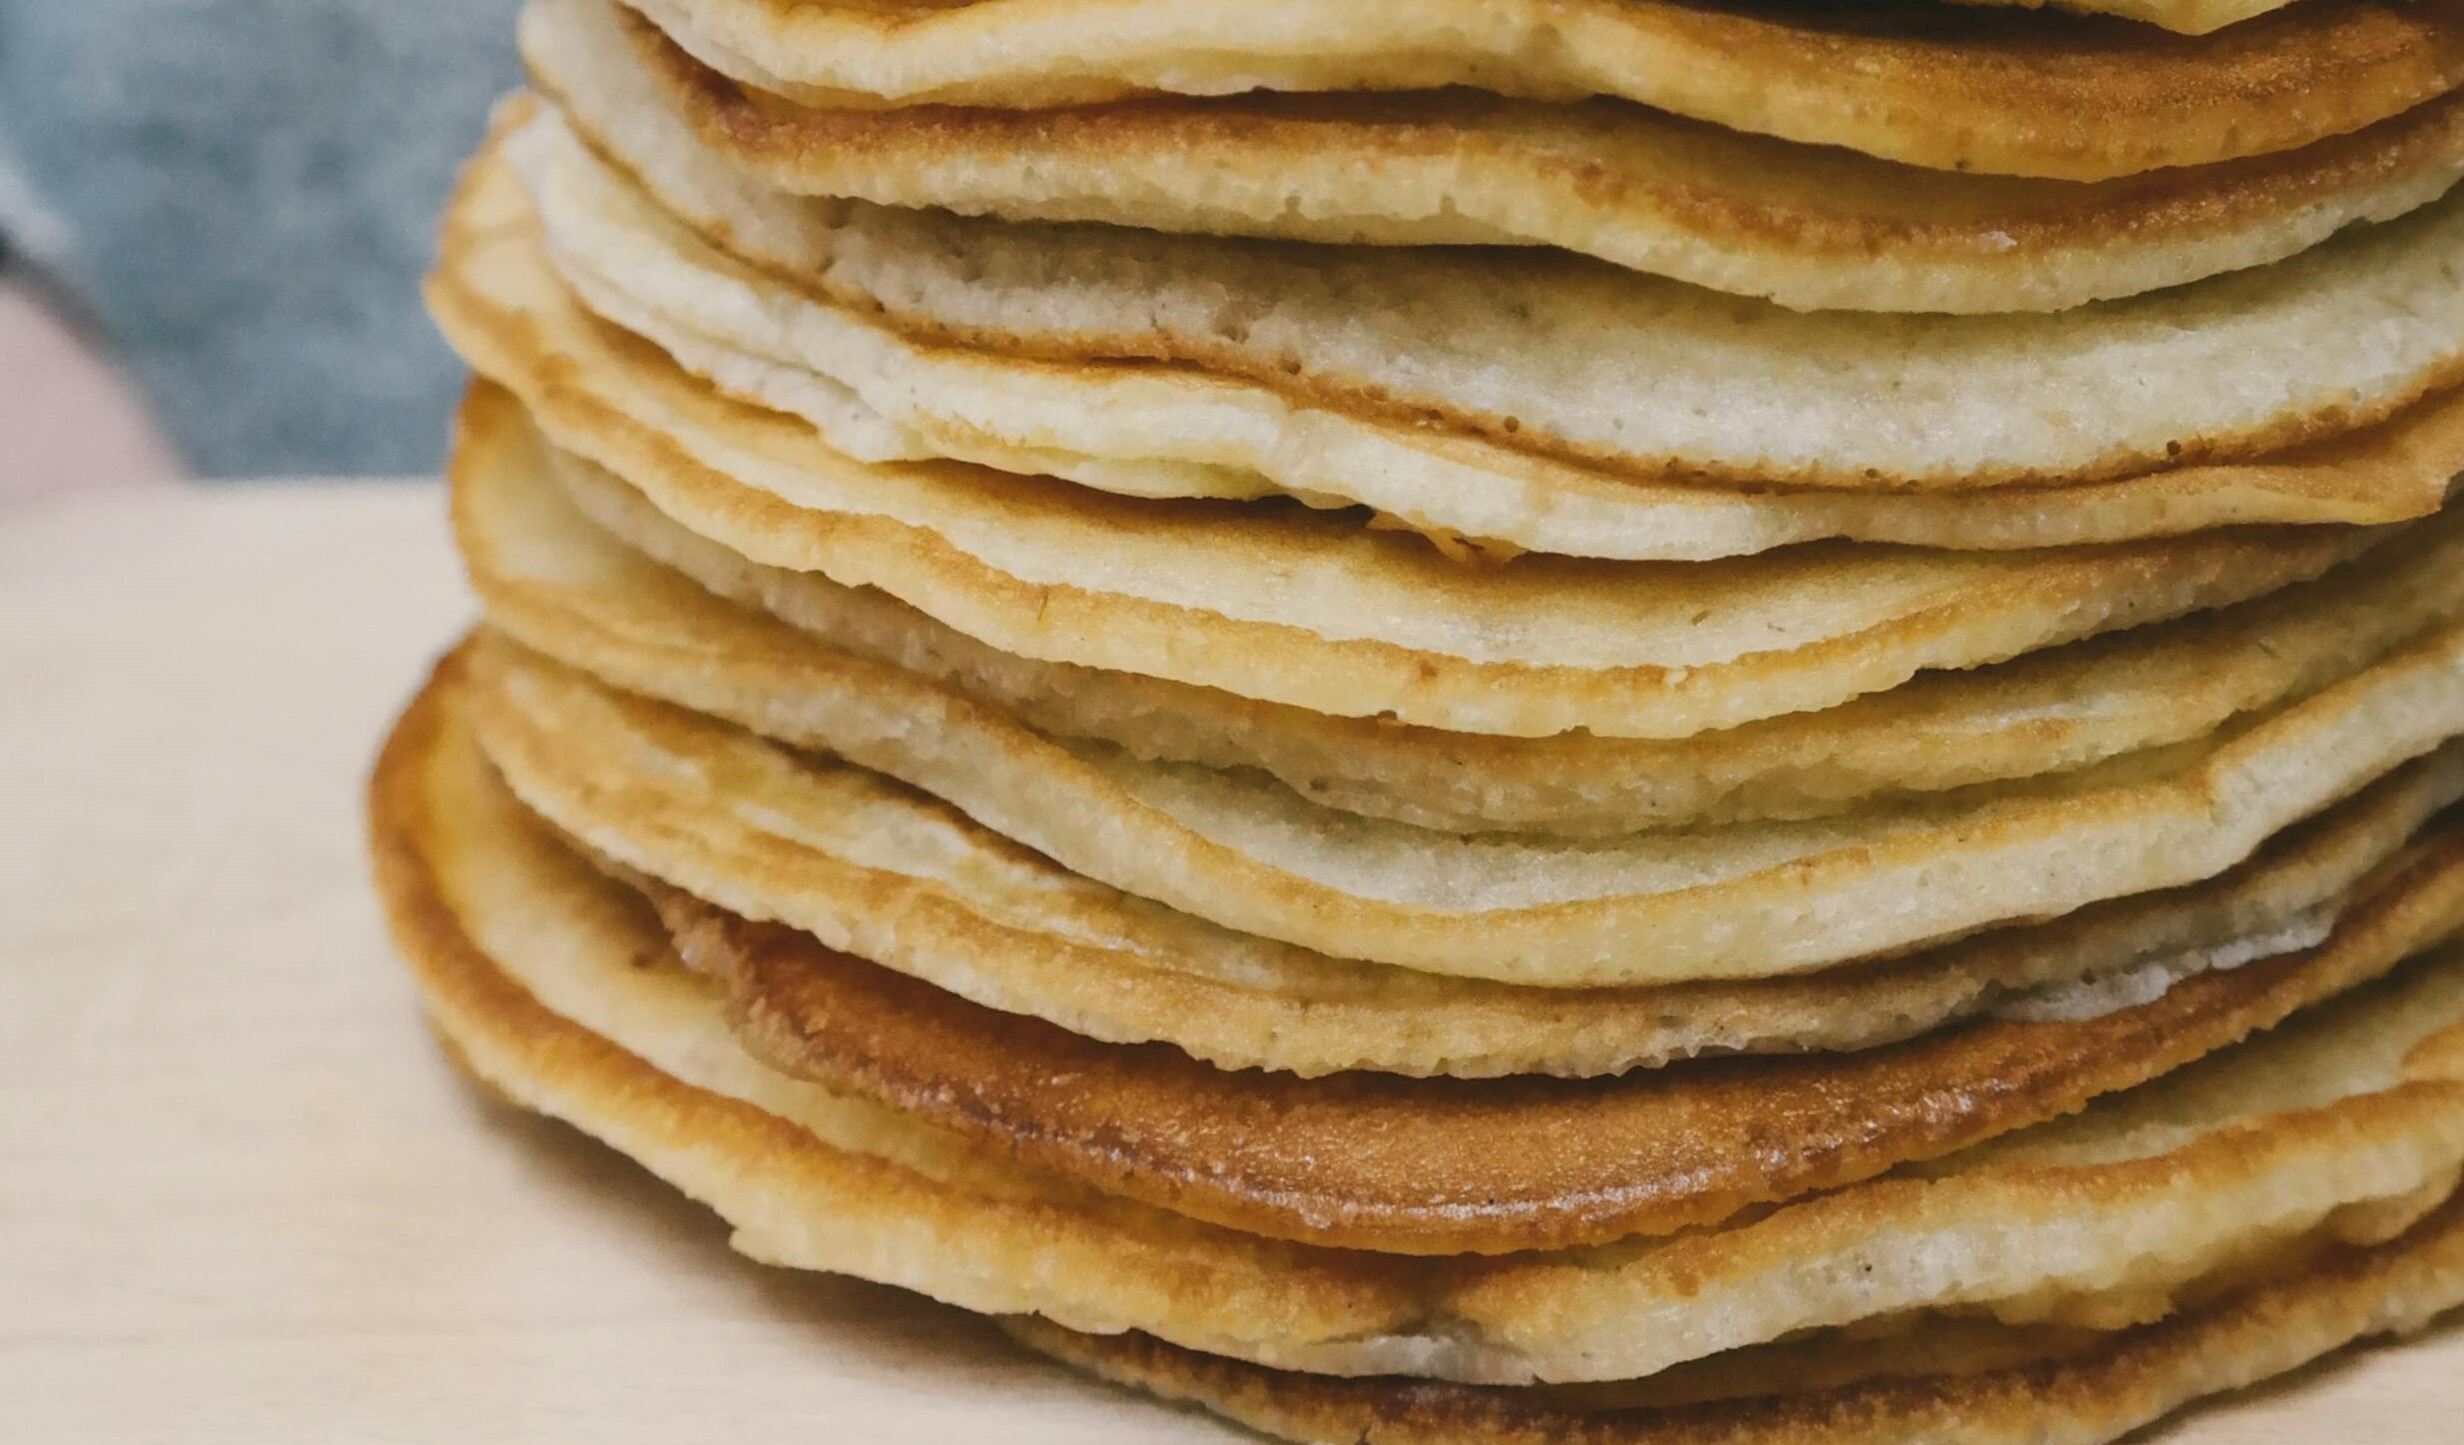 A pile of pancakes